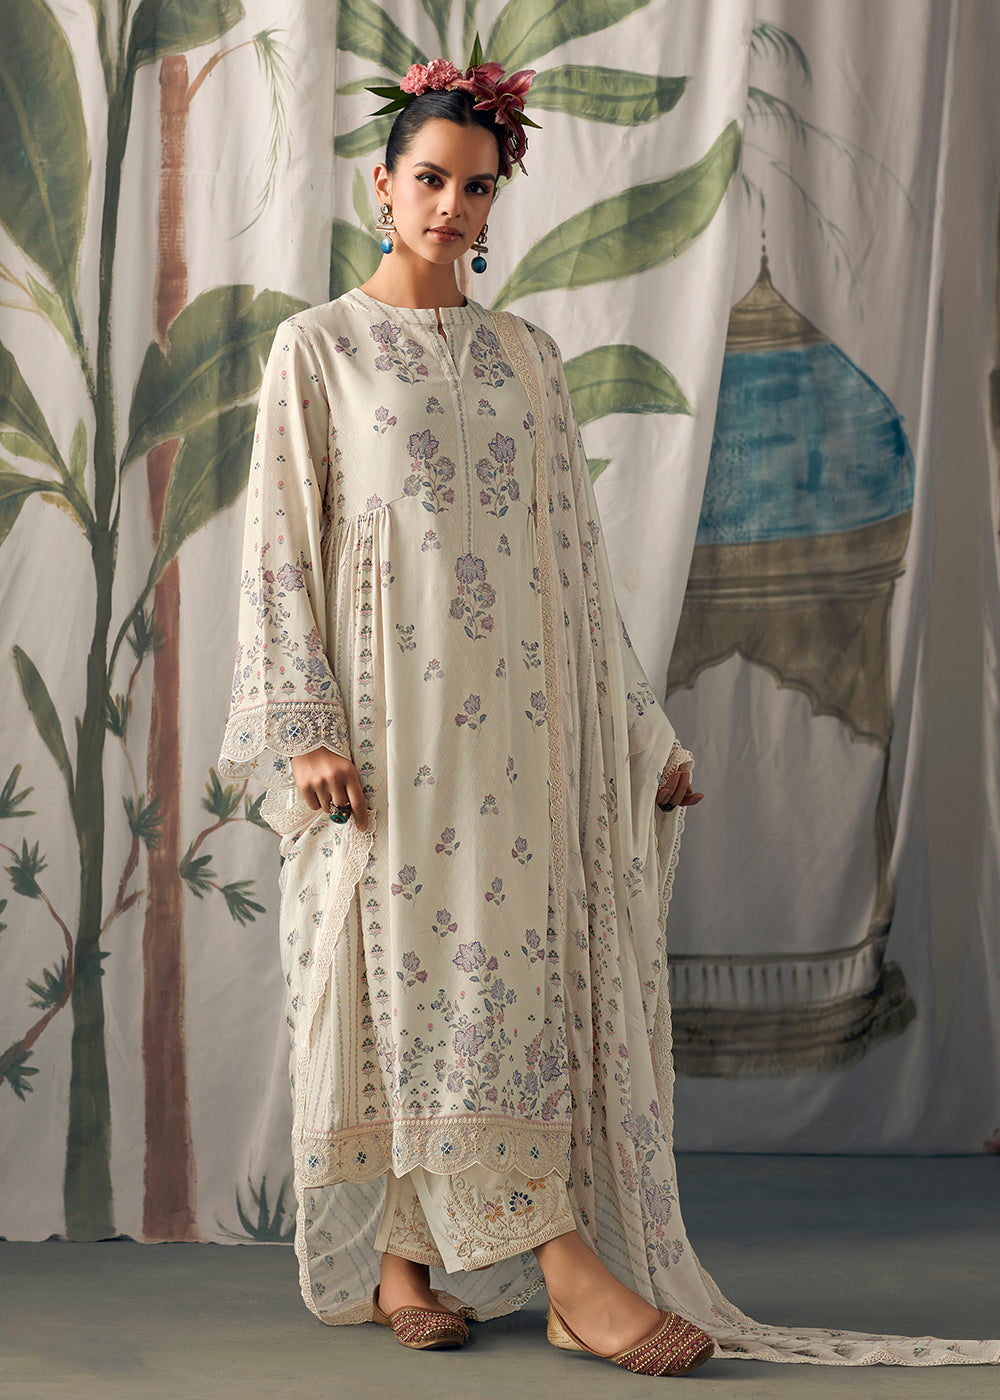 Buy Now Off White Pure Maslin Cotton Digital Printed Salwar Suit Online in USA, UK, Canada, Germany, Australia & Worldwide at Empress Clothing.